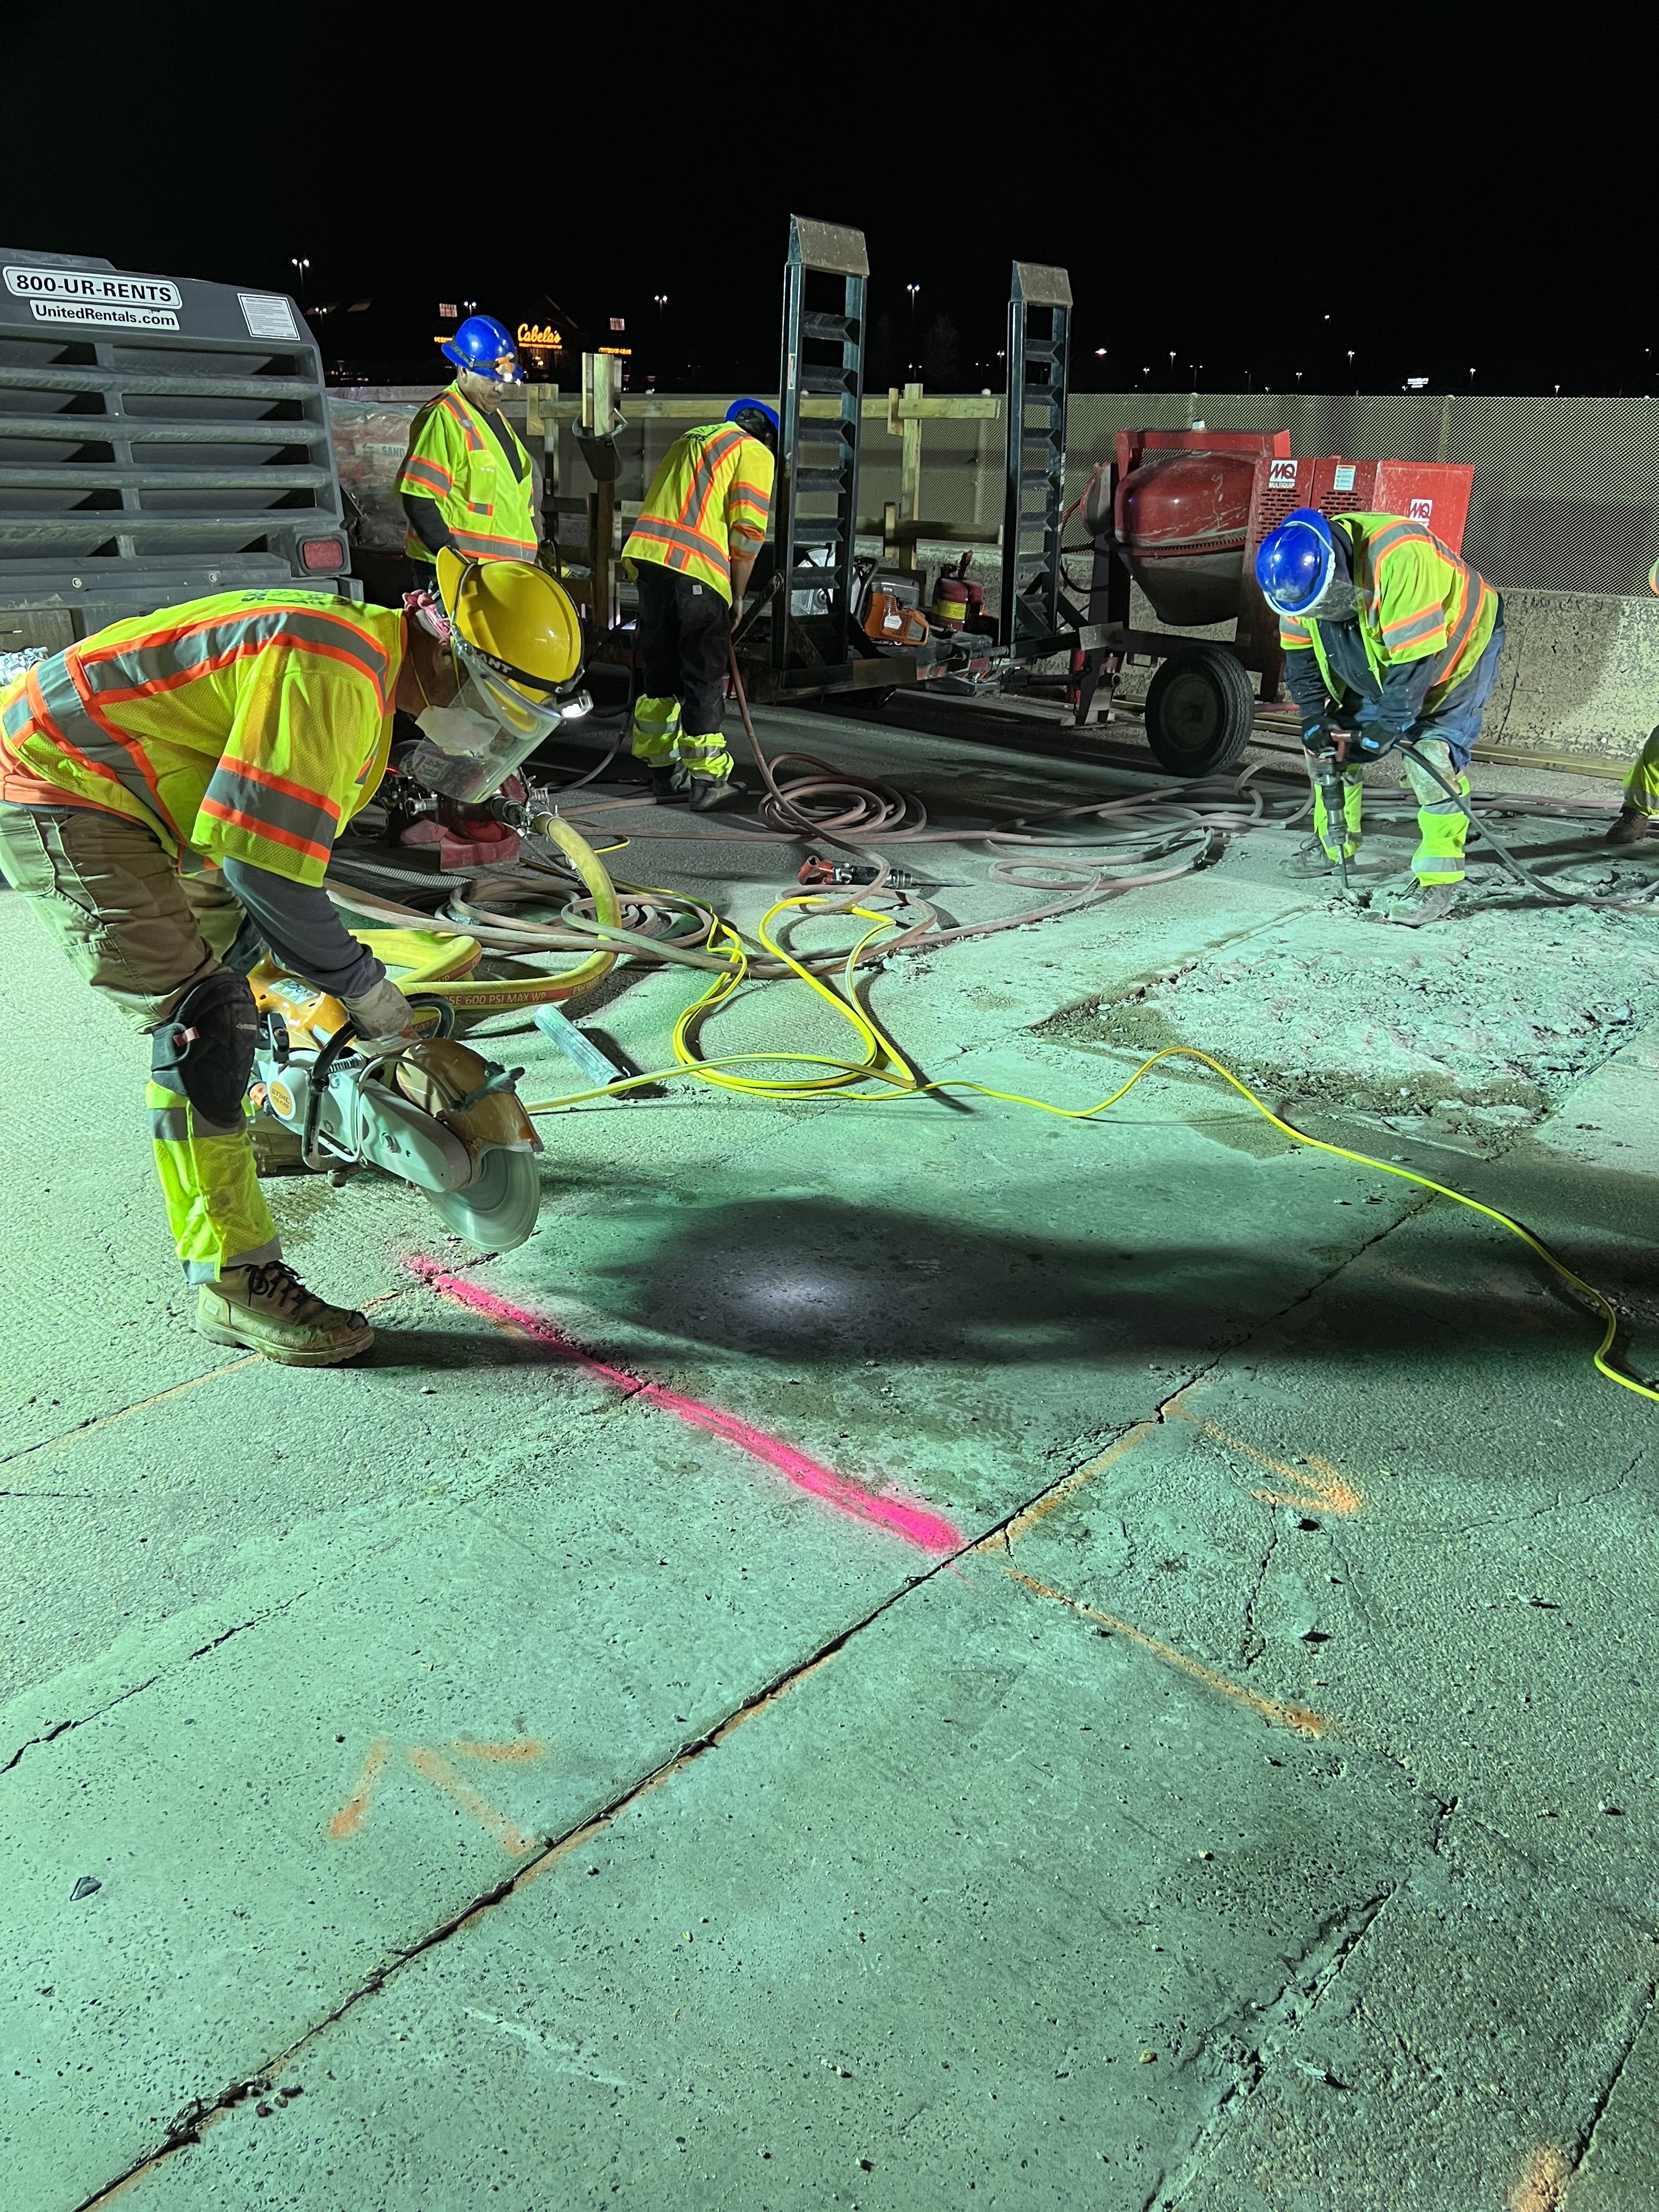 Nighttime concrete slab replacement operations in progress with workers detail image